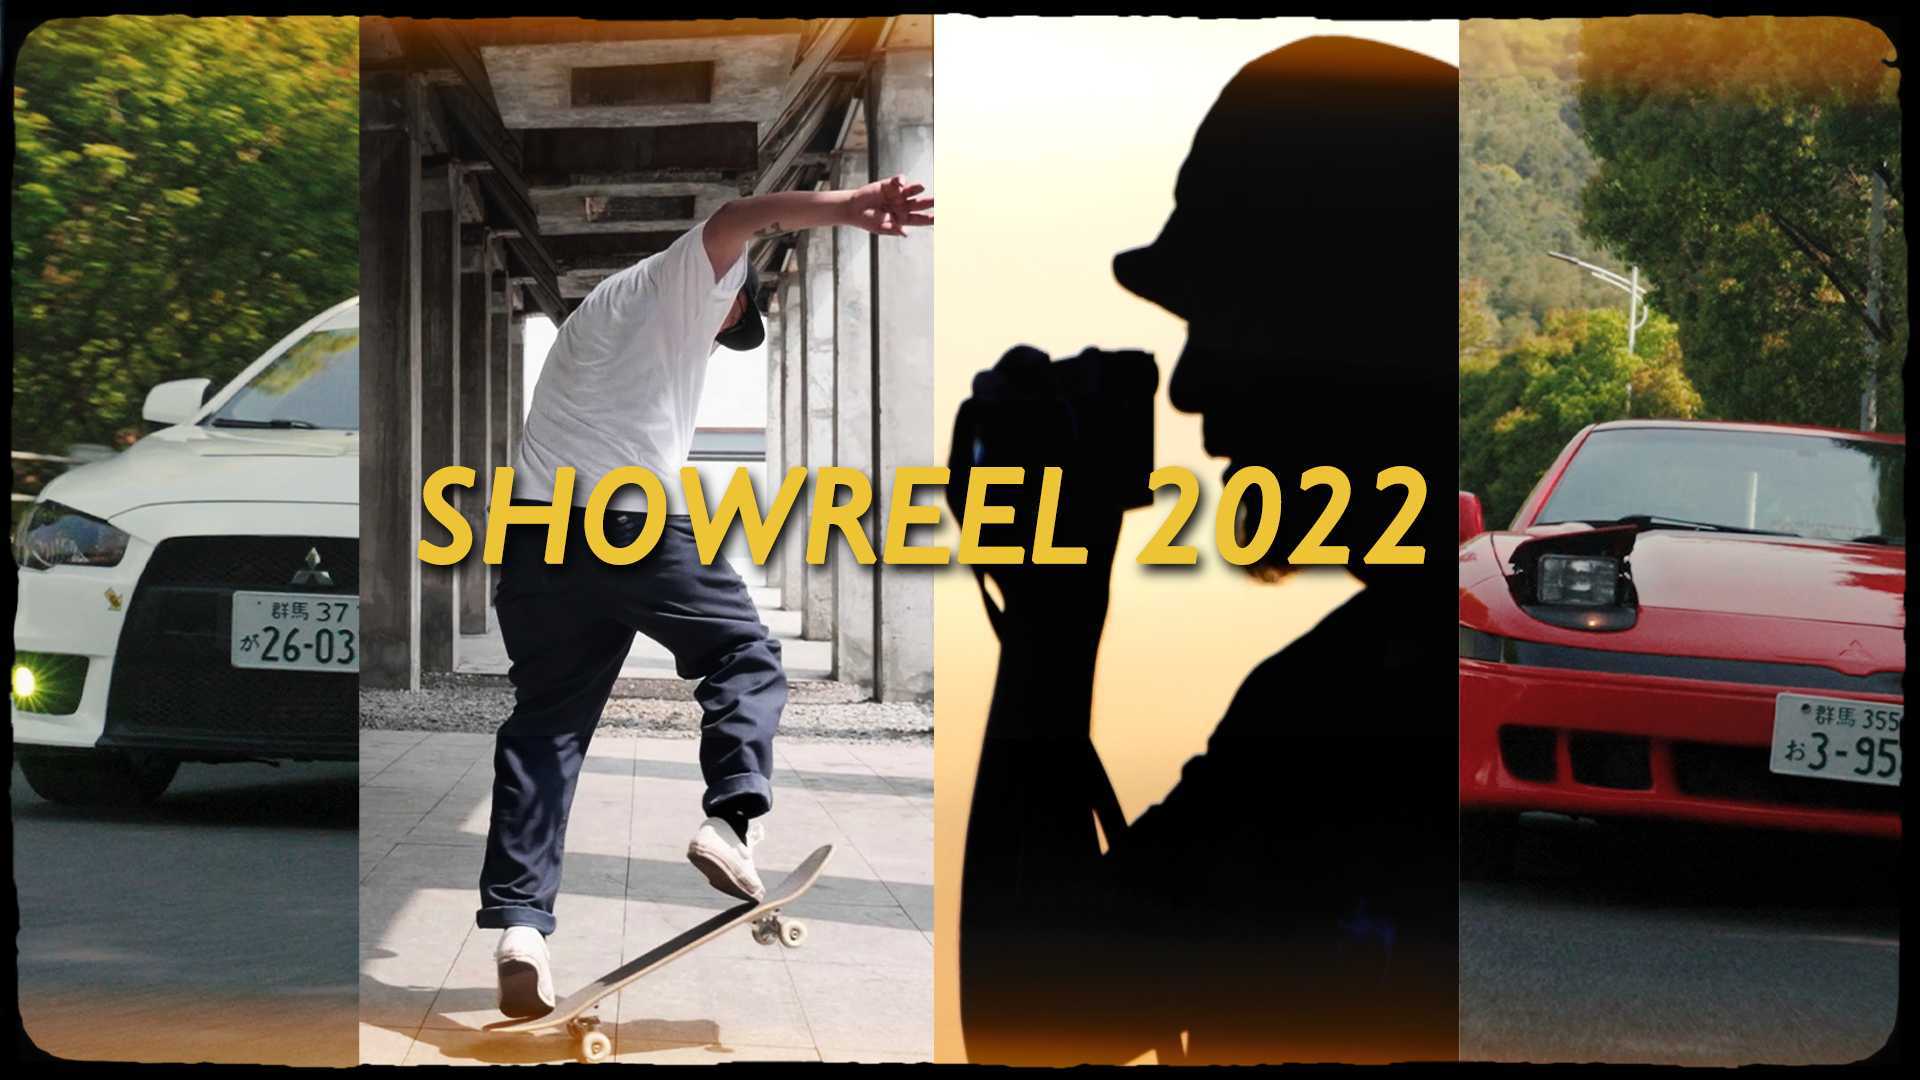 SHOWREEL 2022 Yi's works collection